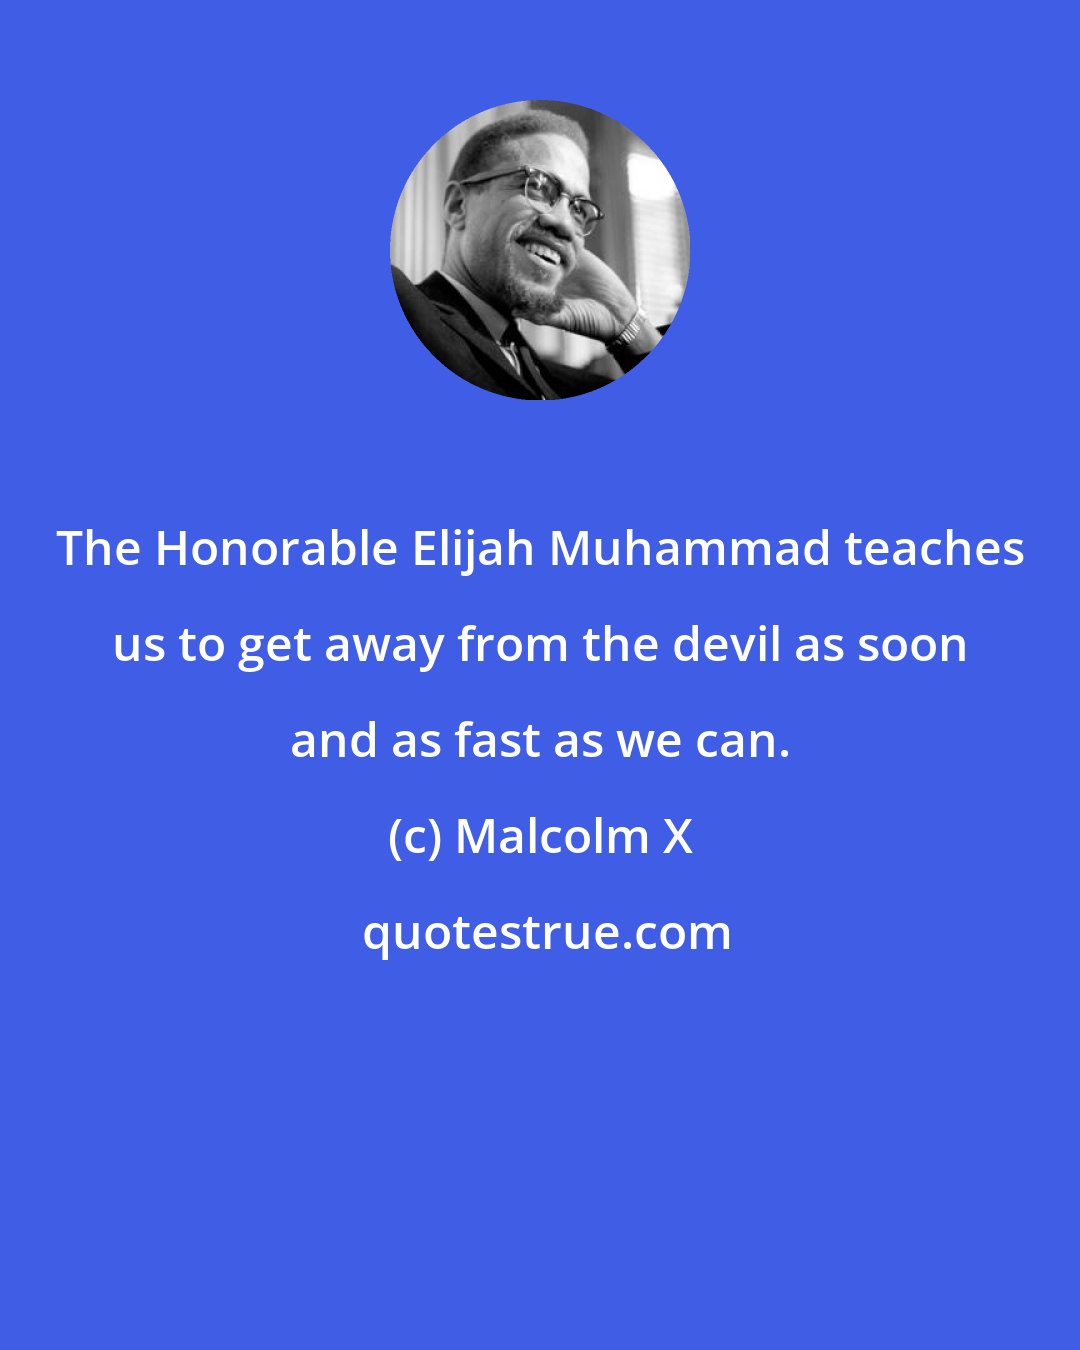 Malcolm X: The Honorable Elijah Muhammad teaches us to get away from the devil as soon and as fast as we can.